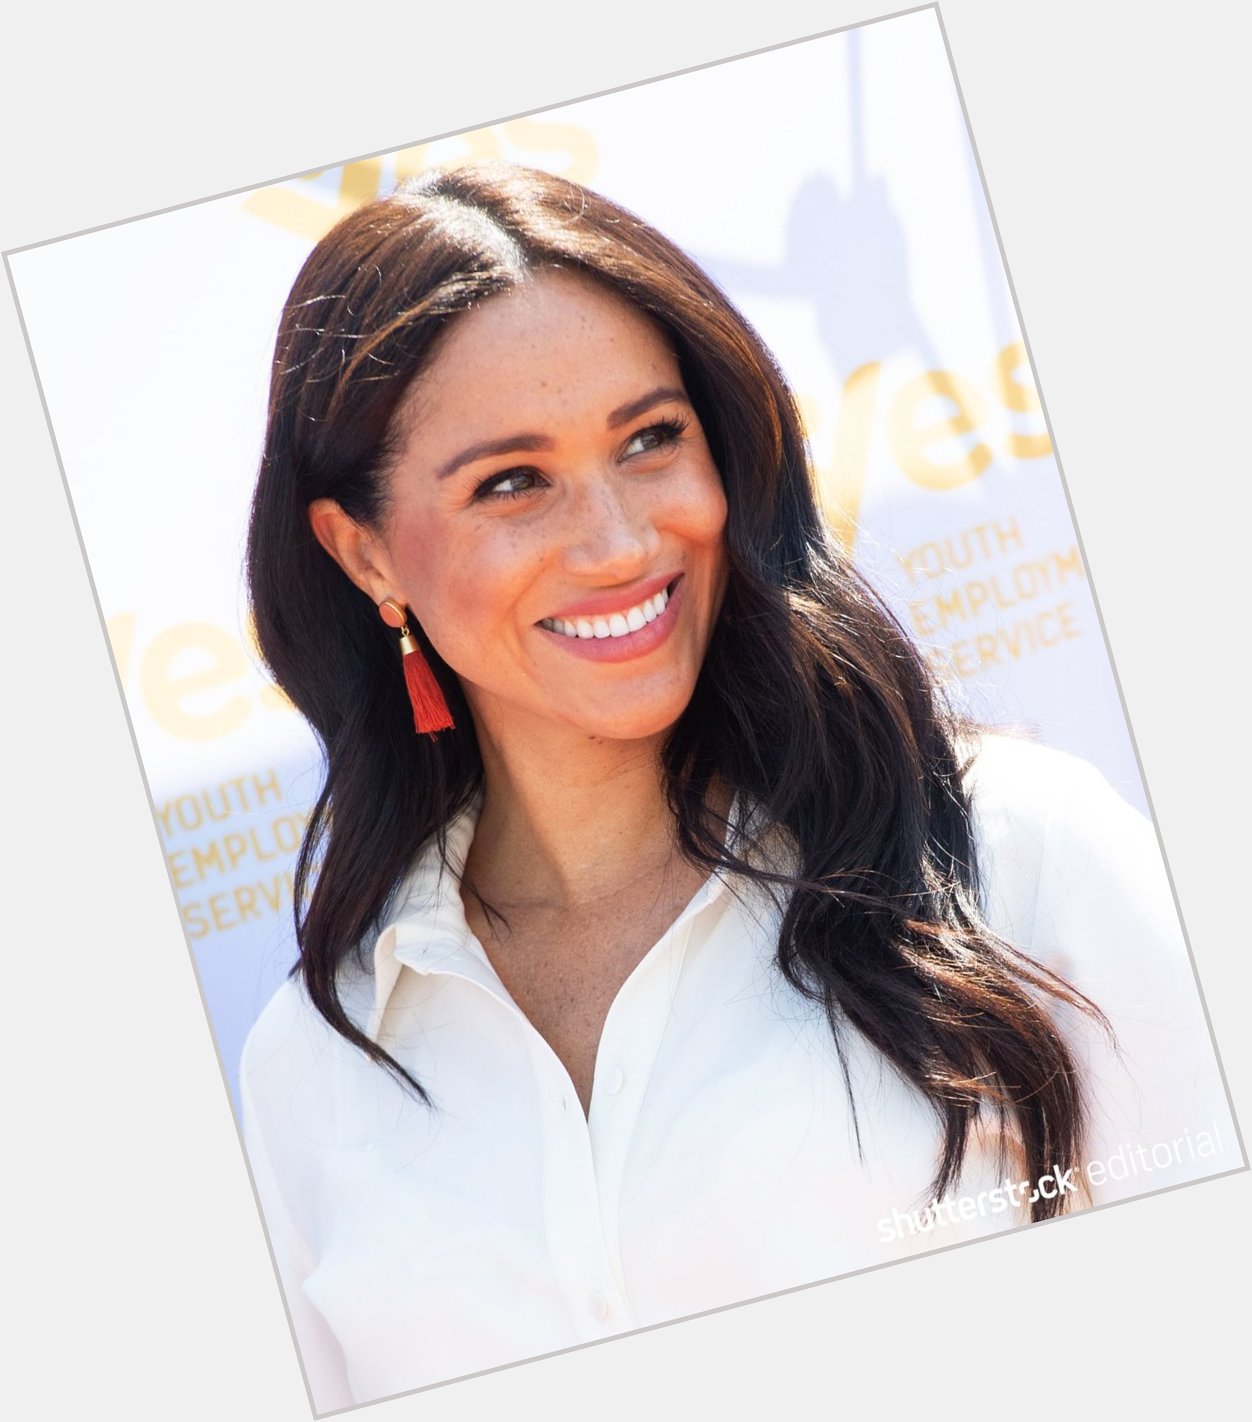 Wishing Meghan Markle, Duchess of Sussex, a very happy 40th birthday today!  